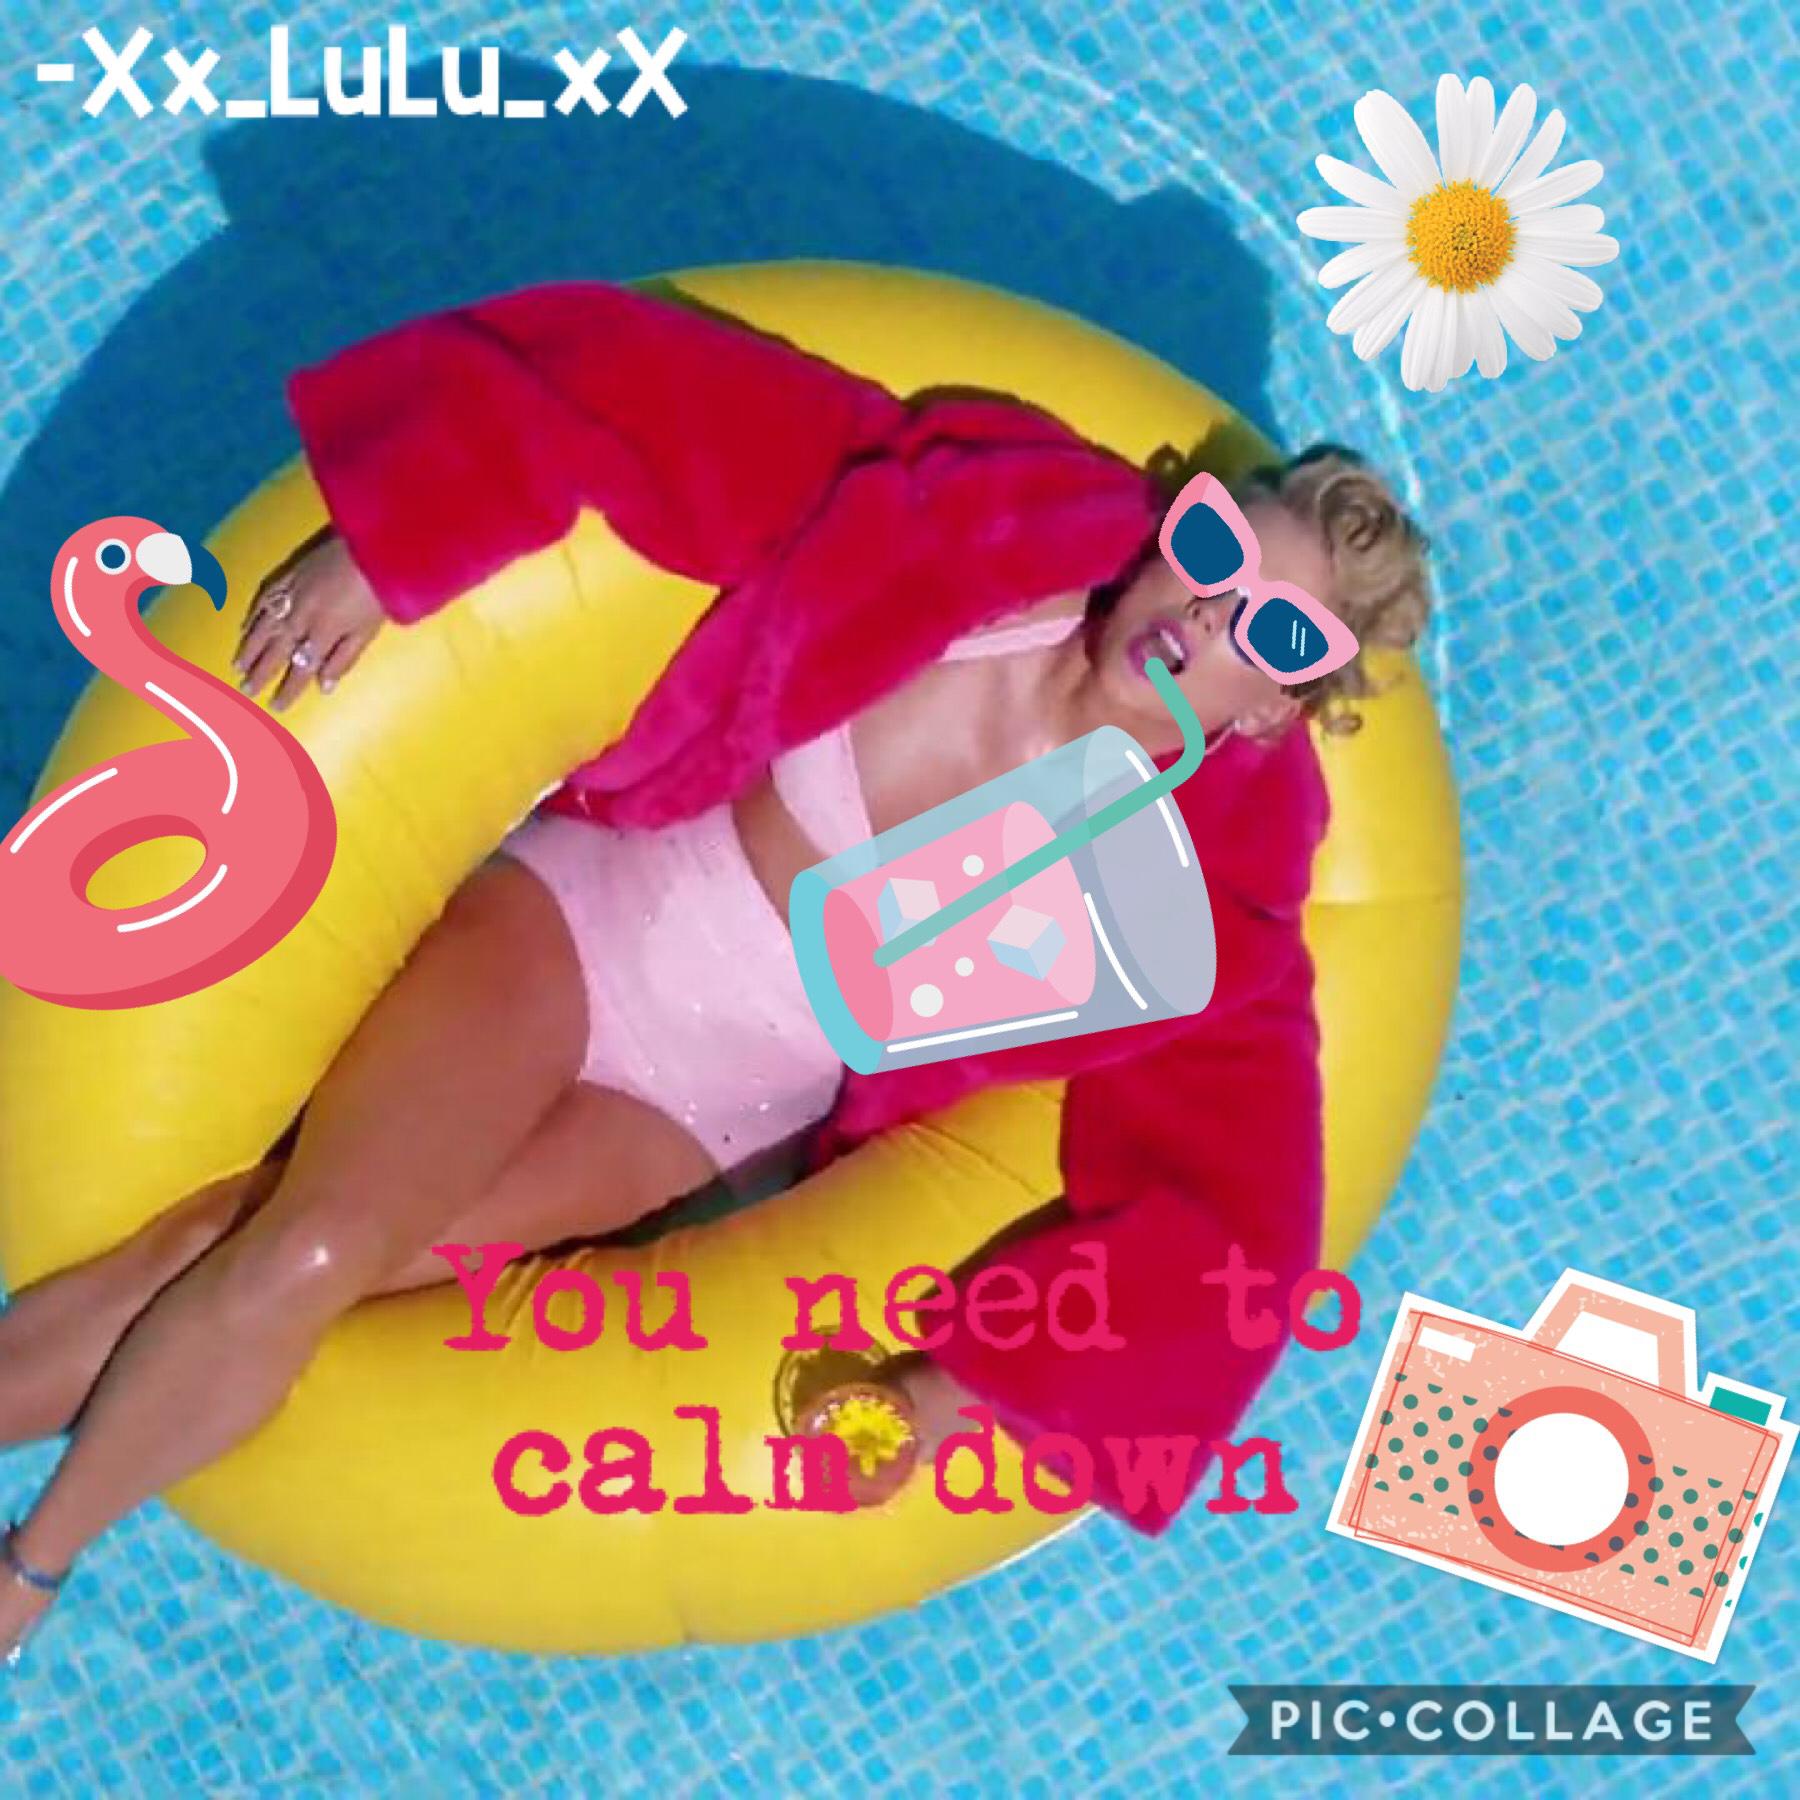 #youneedtocalmdown - Taylor swift 🍭T.A.P🍭